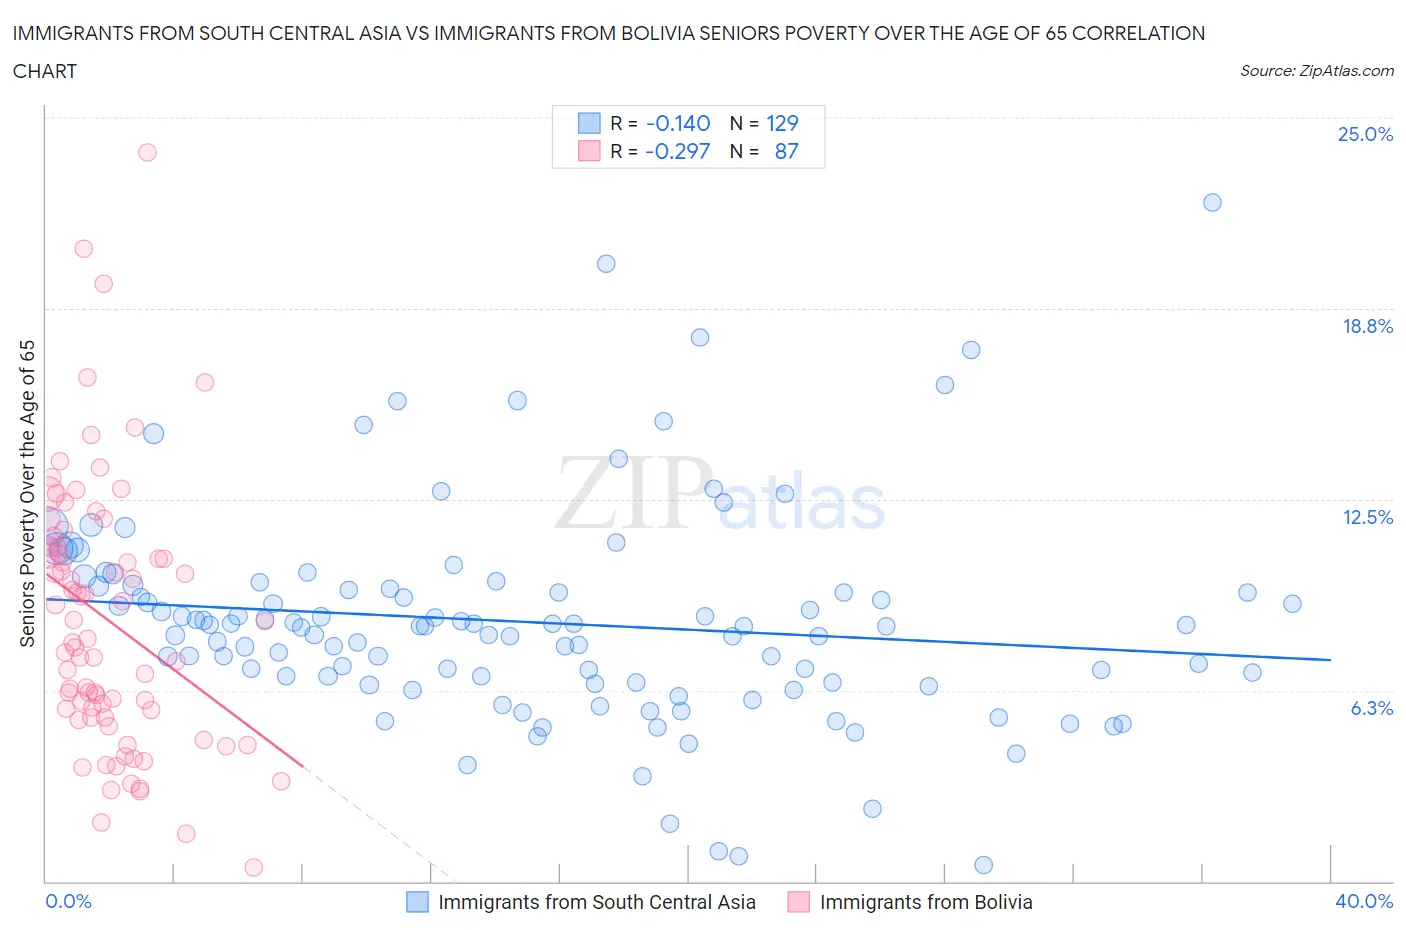 Immigrants from South Central Asia vs Immigrants from Bolivia Seniors Poverty Over the Age of 65